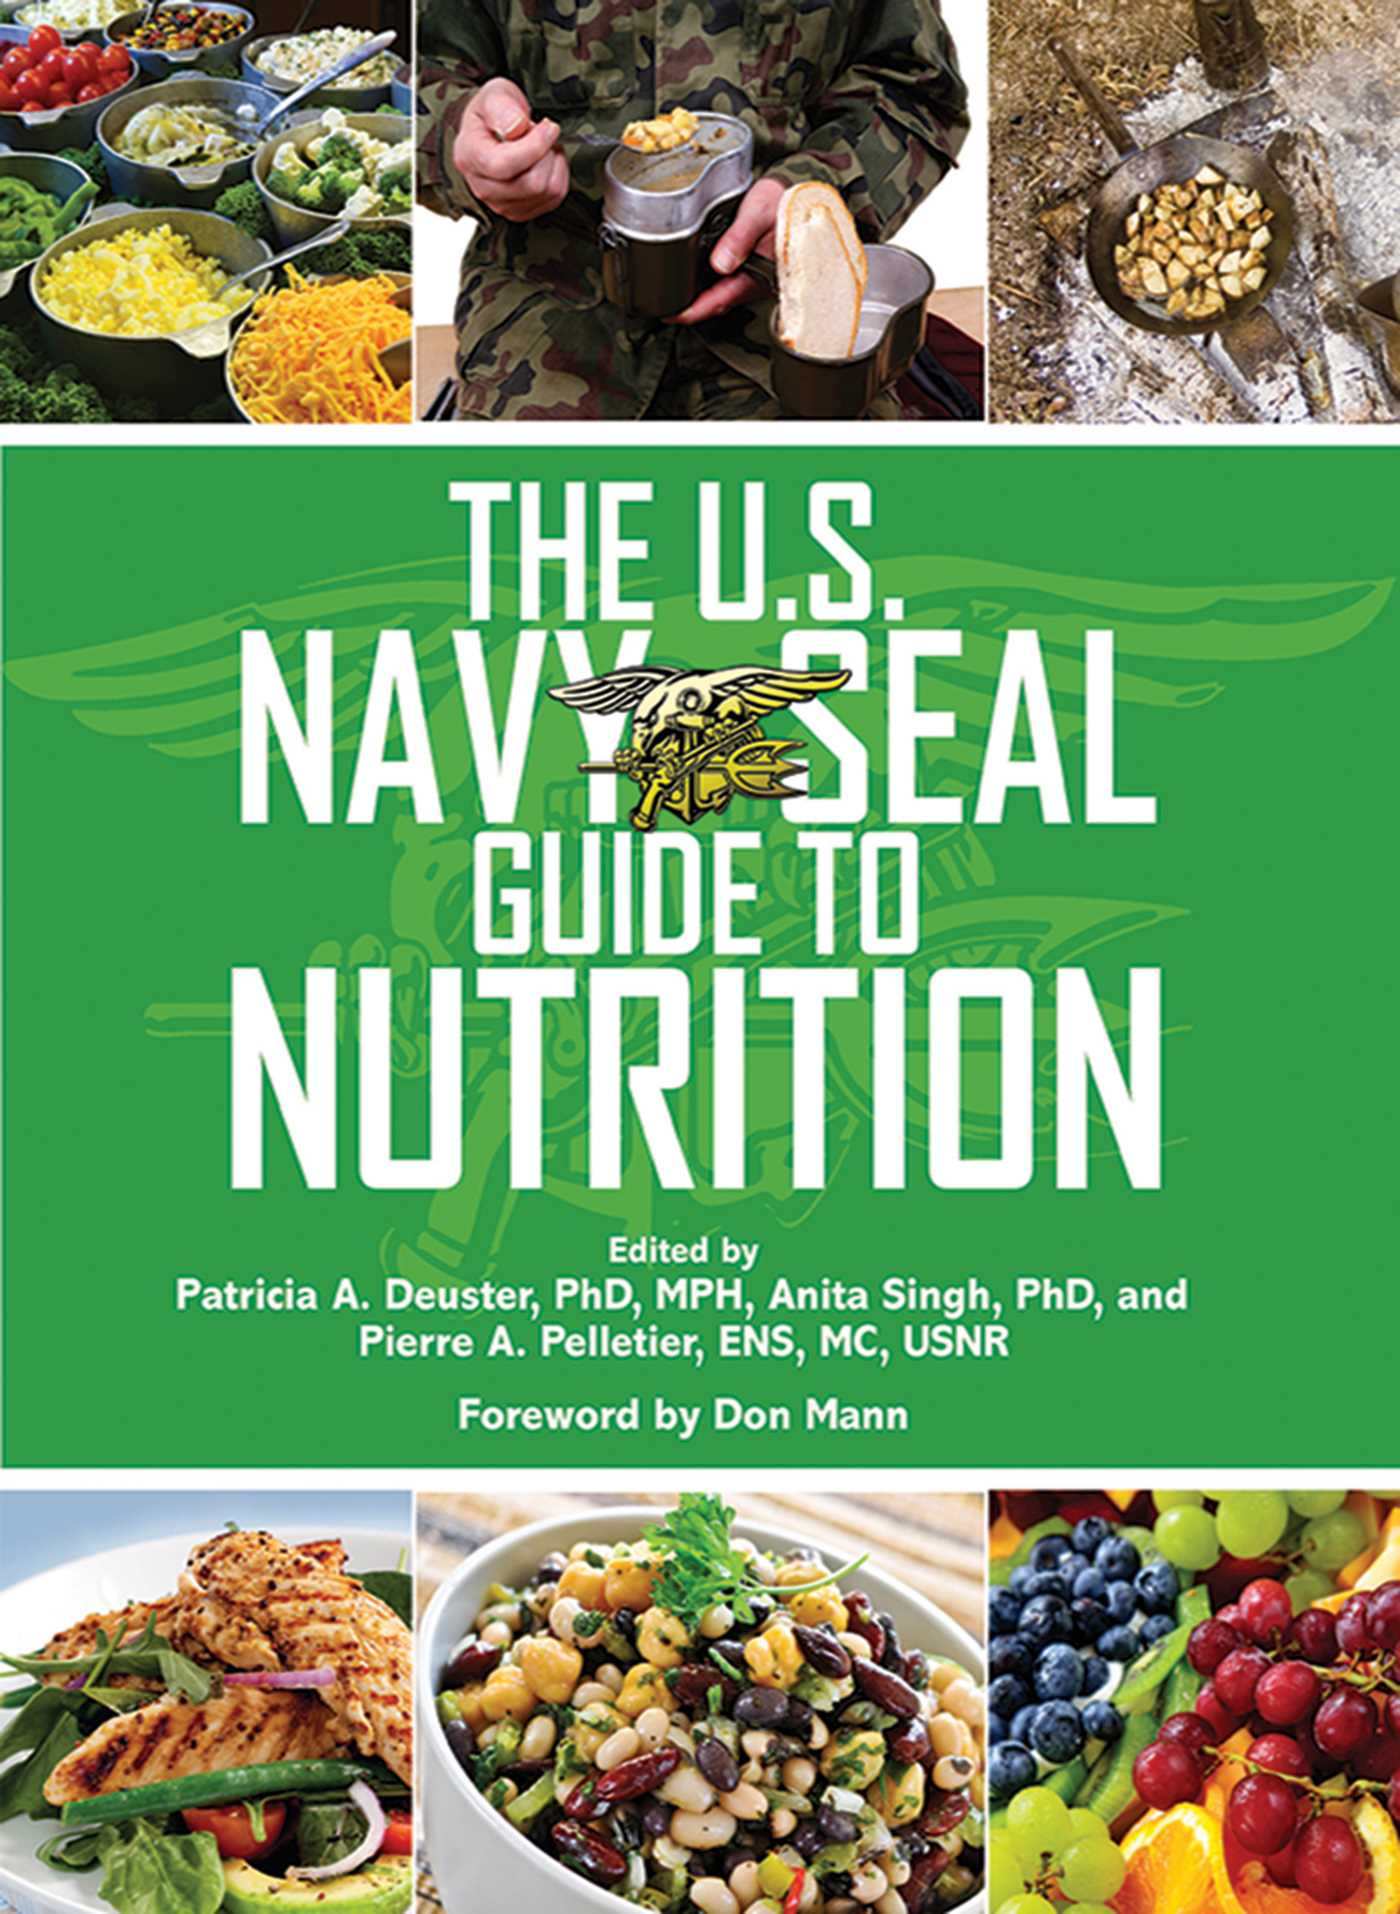 US Army Survival: The U.S. Navy SEAL Guide to Nutrition (Paperback) - image 2 of 2